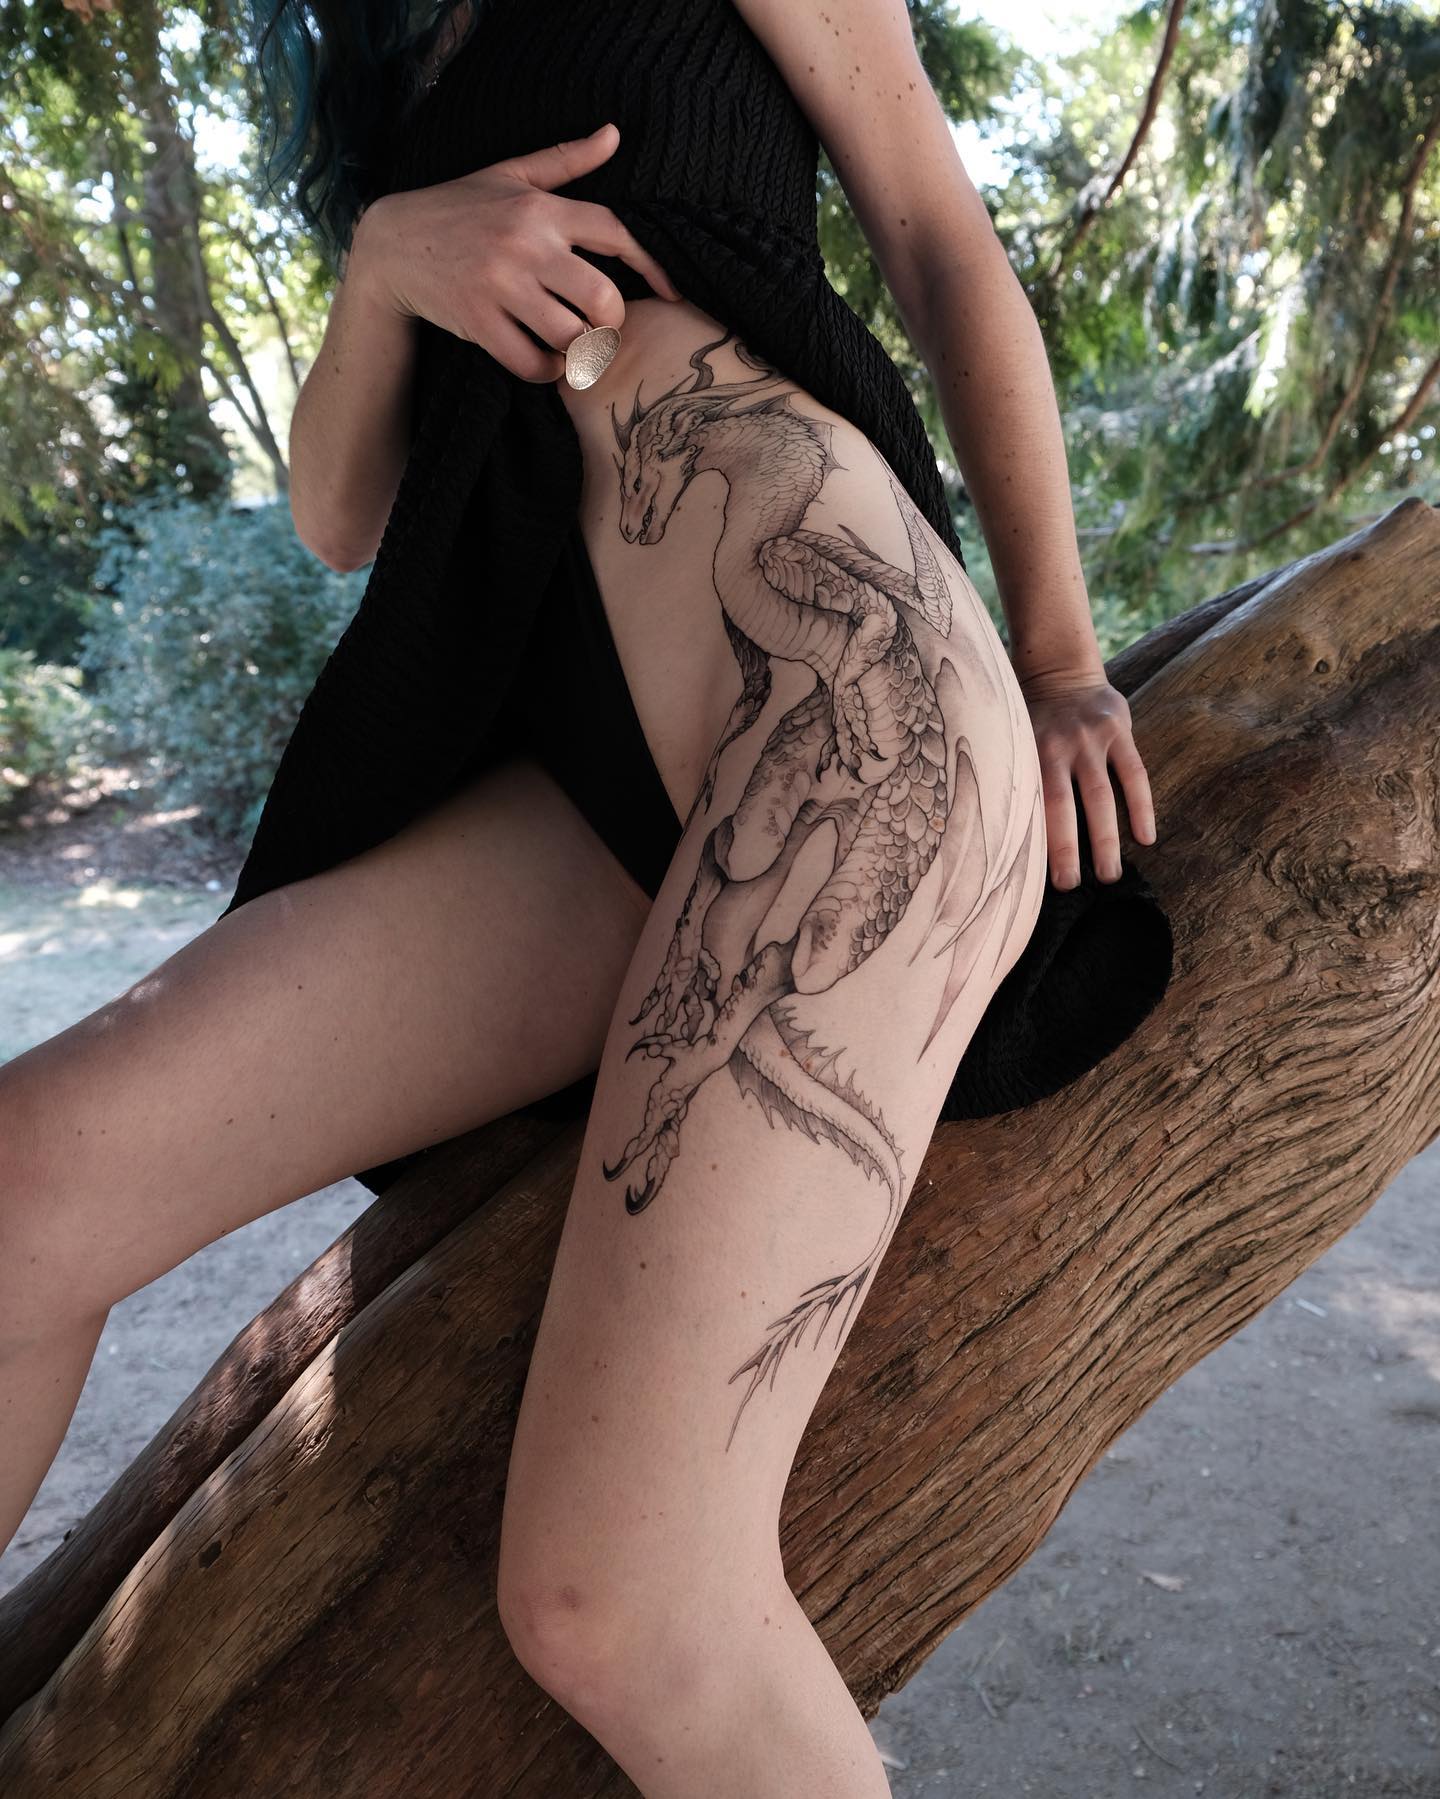 This giant hip tattoo will suit women who like bold and quirky tattoos. If you want to show your true power and your inner sensibility, this will suit you. Just know that everyone will think of you as a tough and strong little lady.